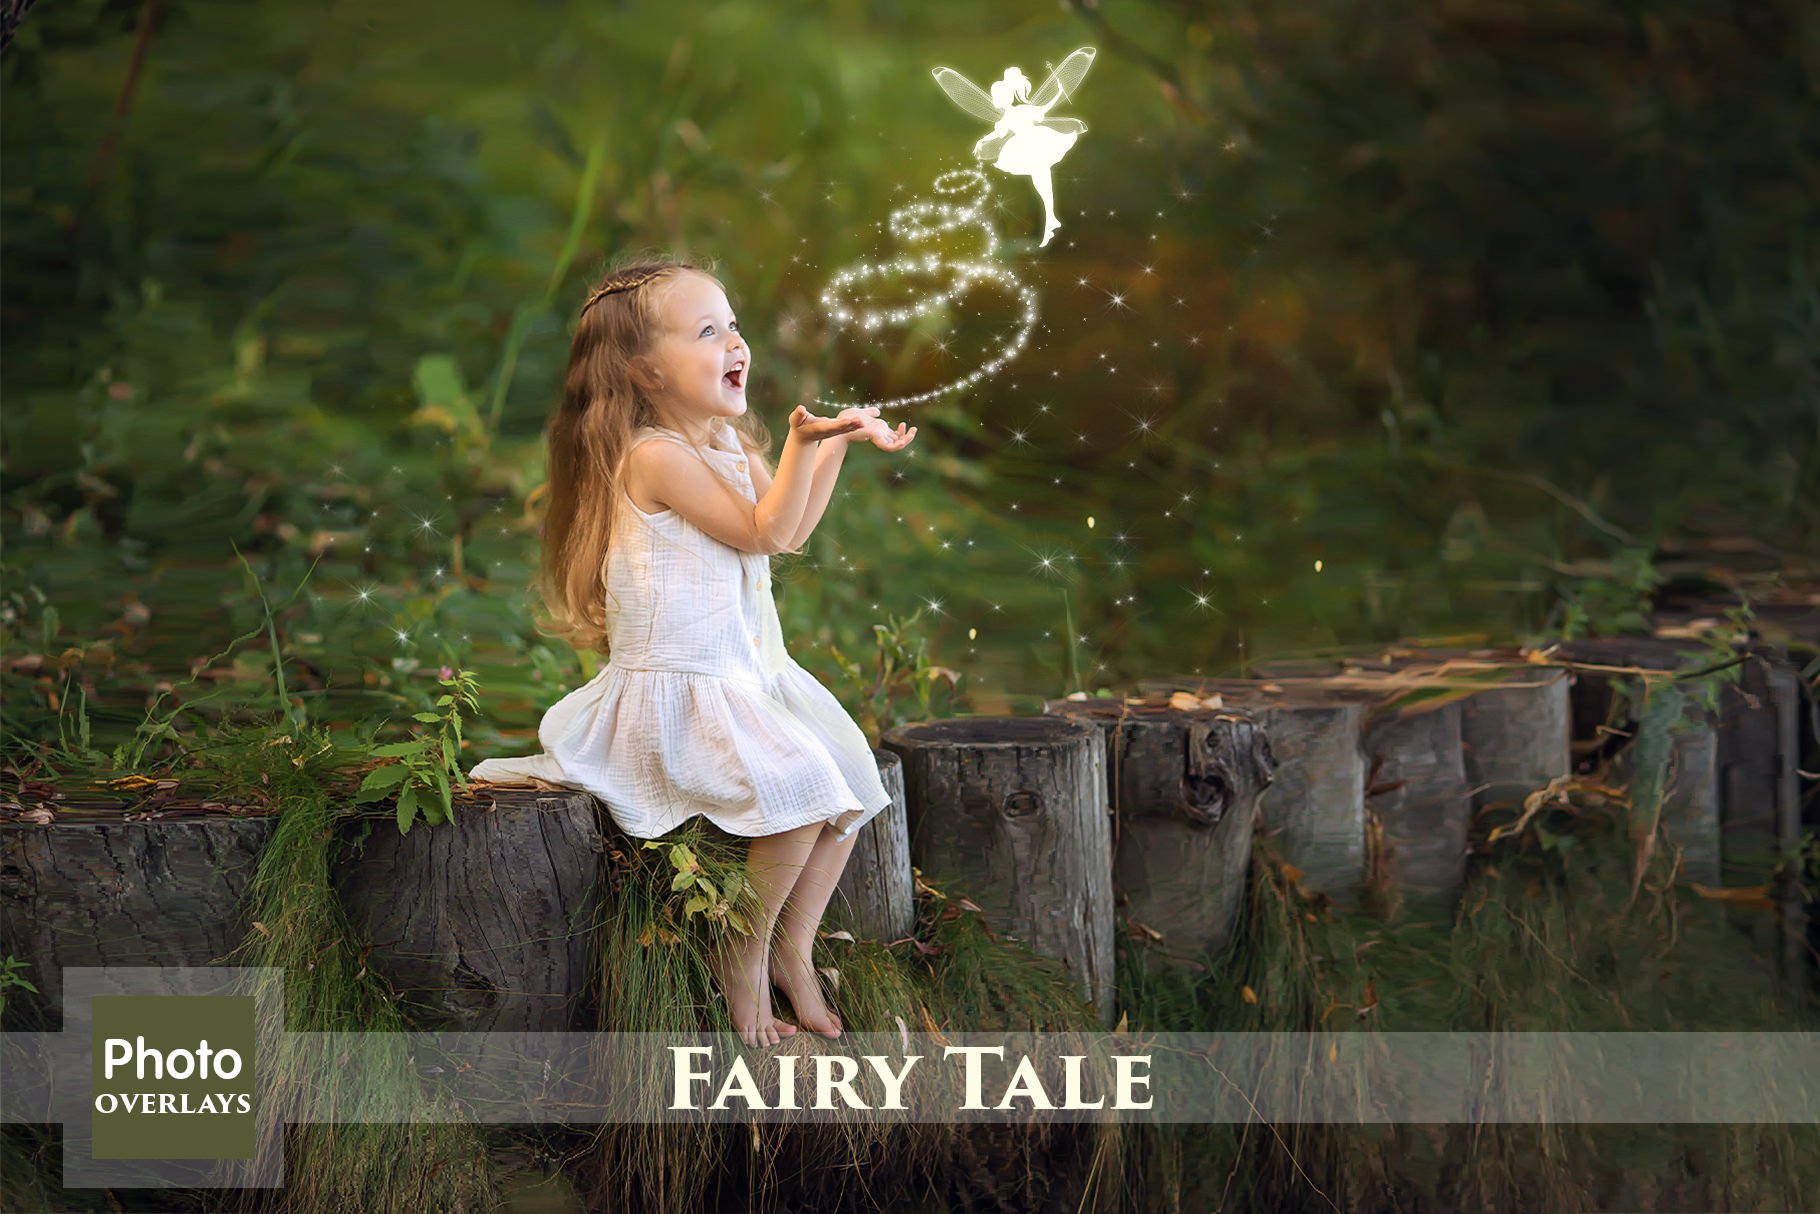 Fairy tale overlayscover image.